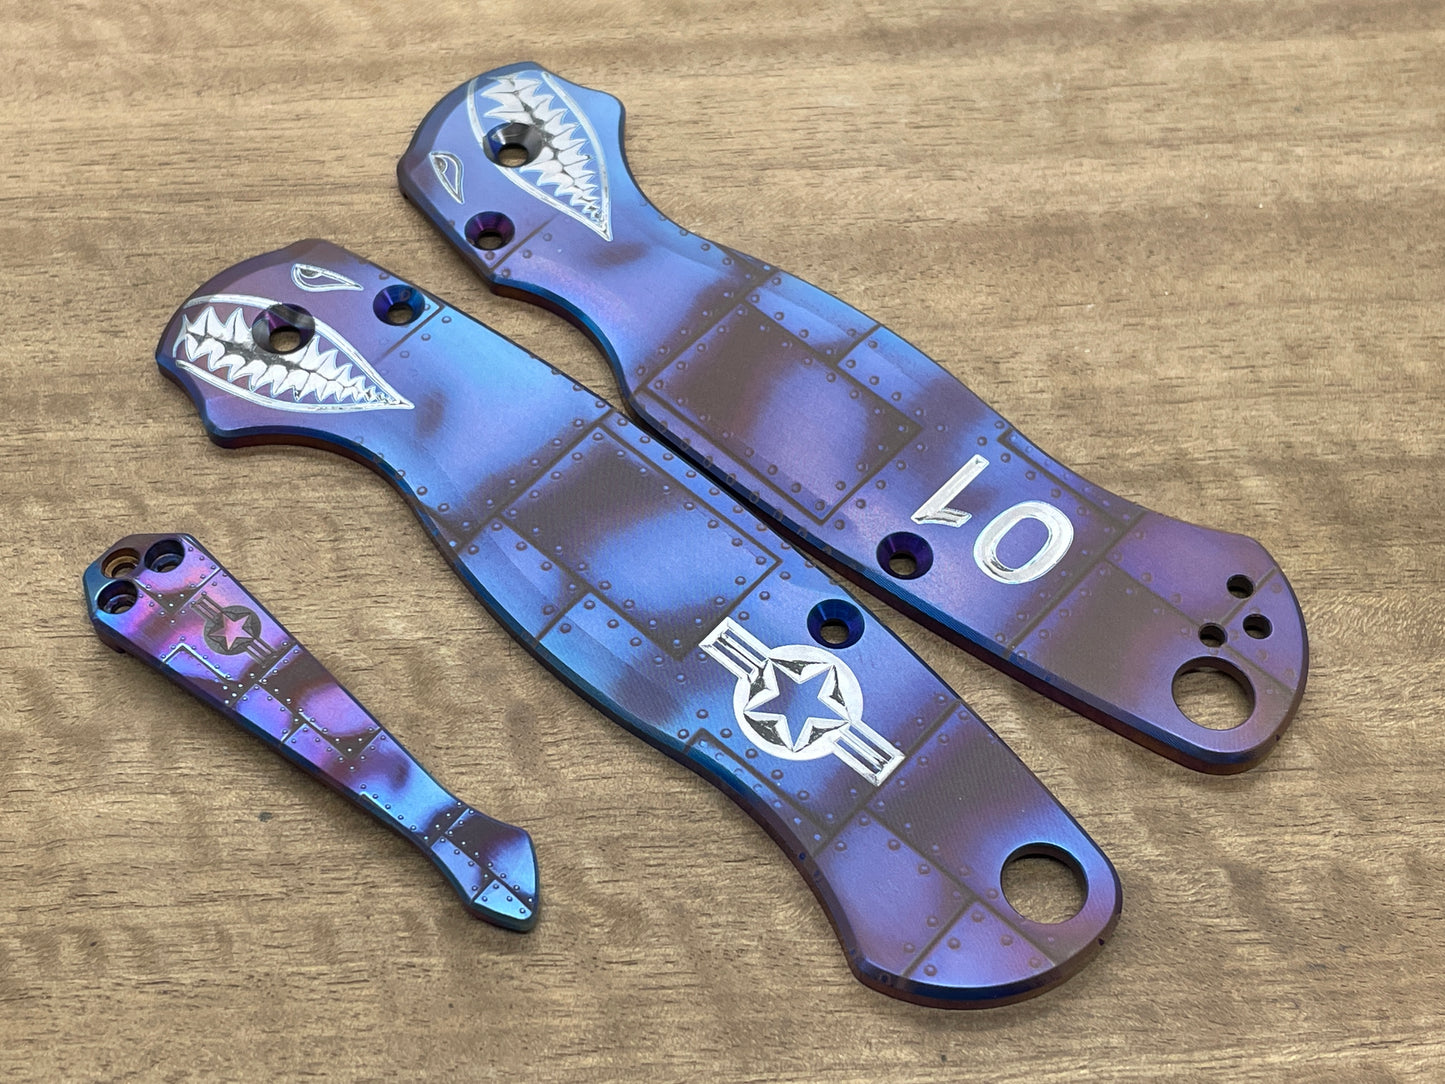 Flamed P40 RIVETED AIRPLANE Titanium scales for Spyderco Paramilitary 2 PM2